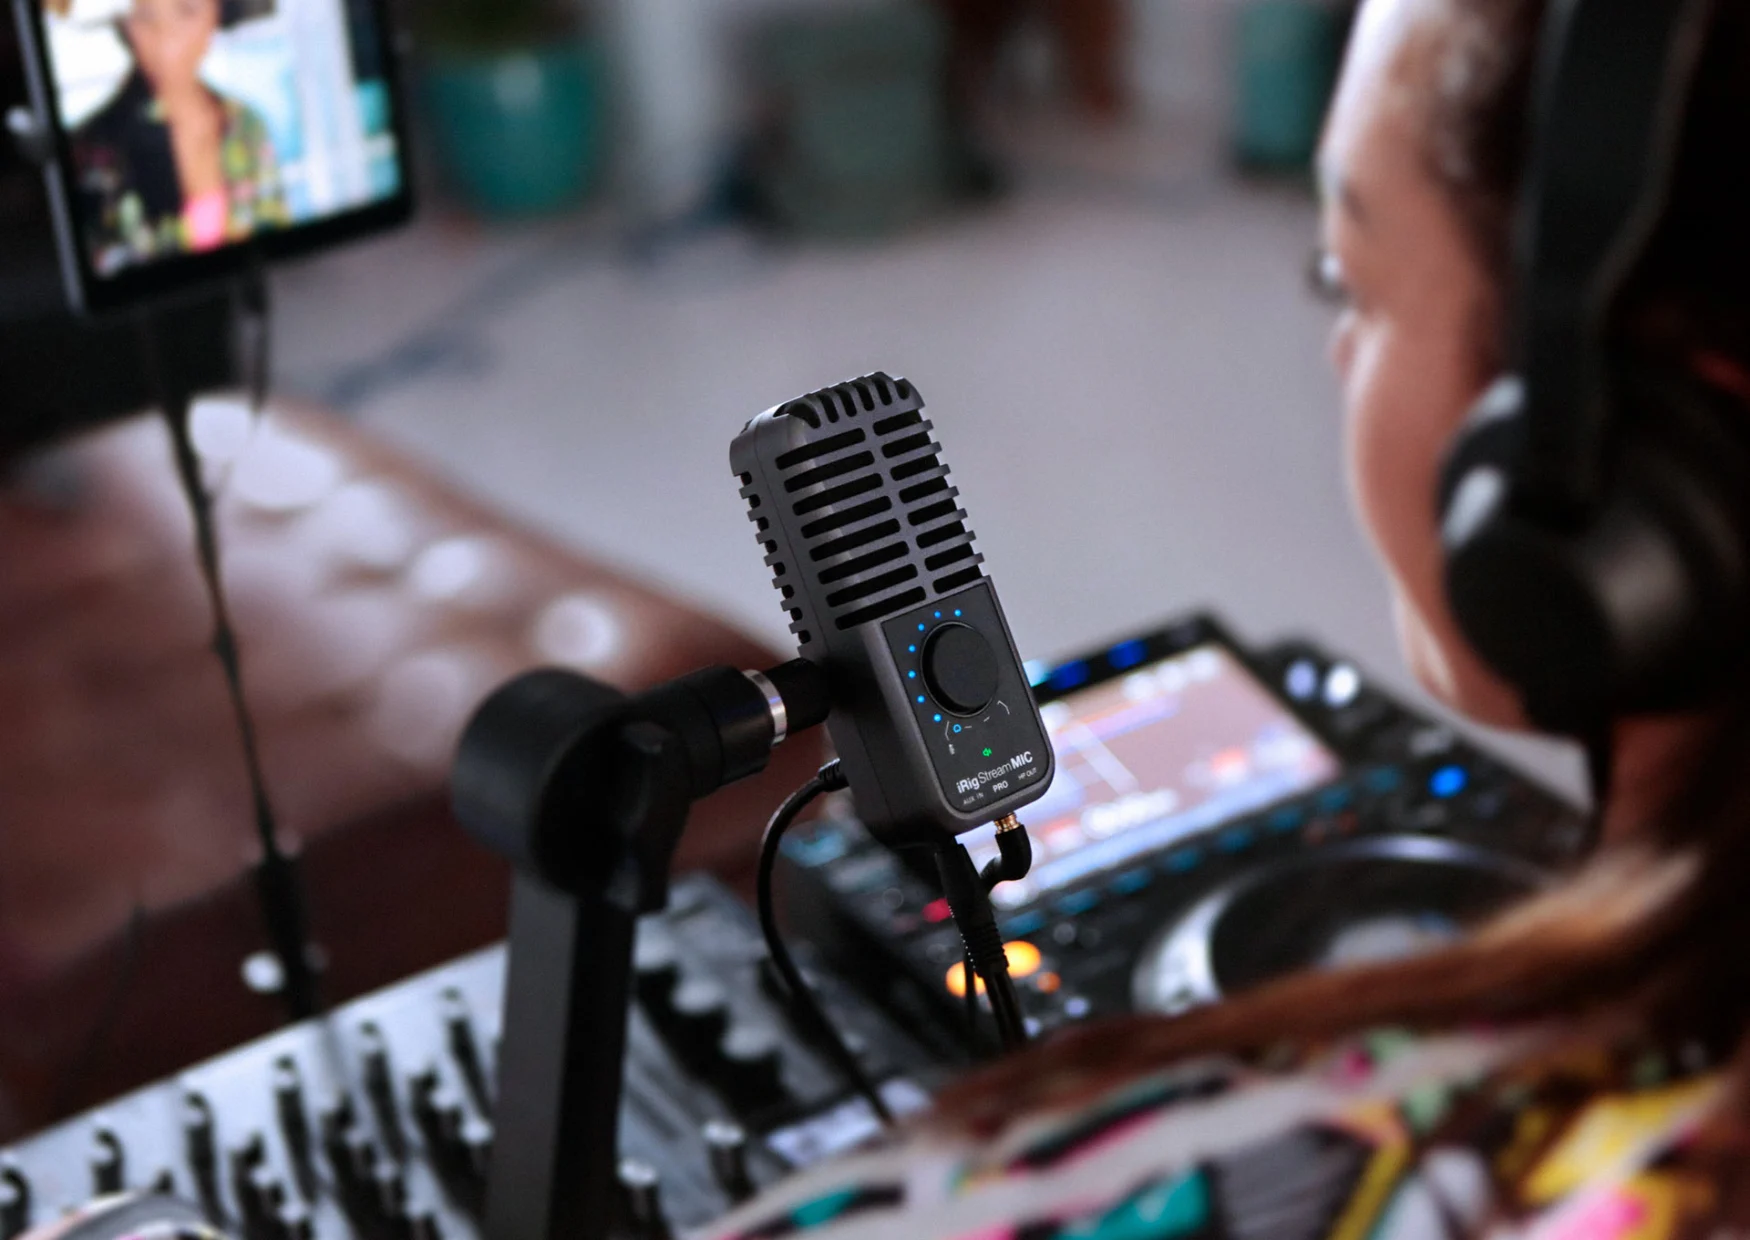 IK's iRig Stream Mic Pro aims to make music and content creation easier